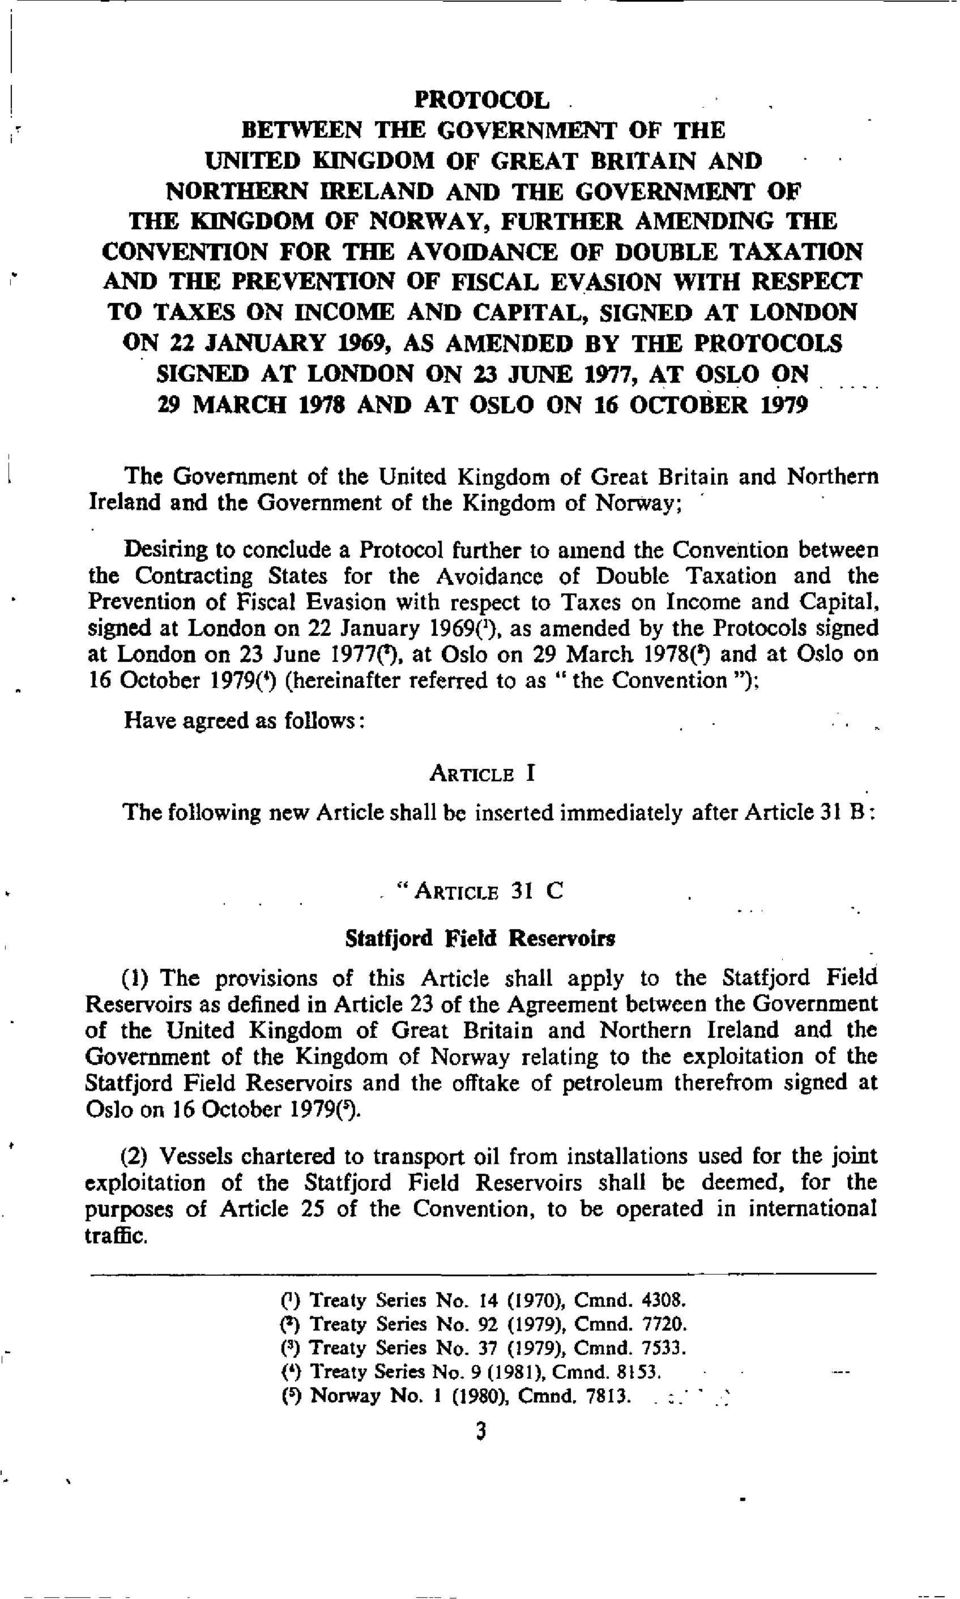 ON 29 MARCH 1978 AND AT OSLO ON 16 OCTOBER 1979 The Government of the United Kingdom of Great Britain Ireland and the Government of the Kingdom of Norway; and Northern Desiring to conclude a Protocol